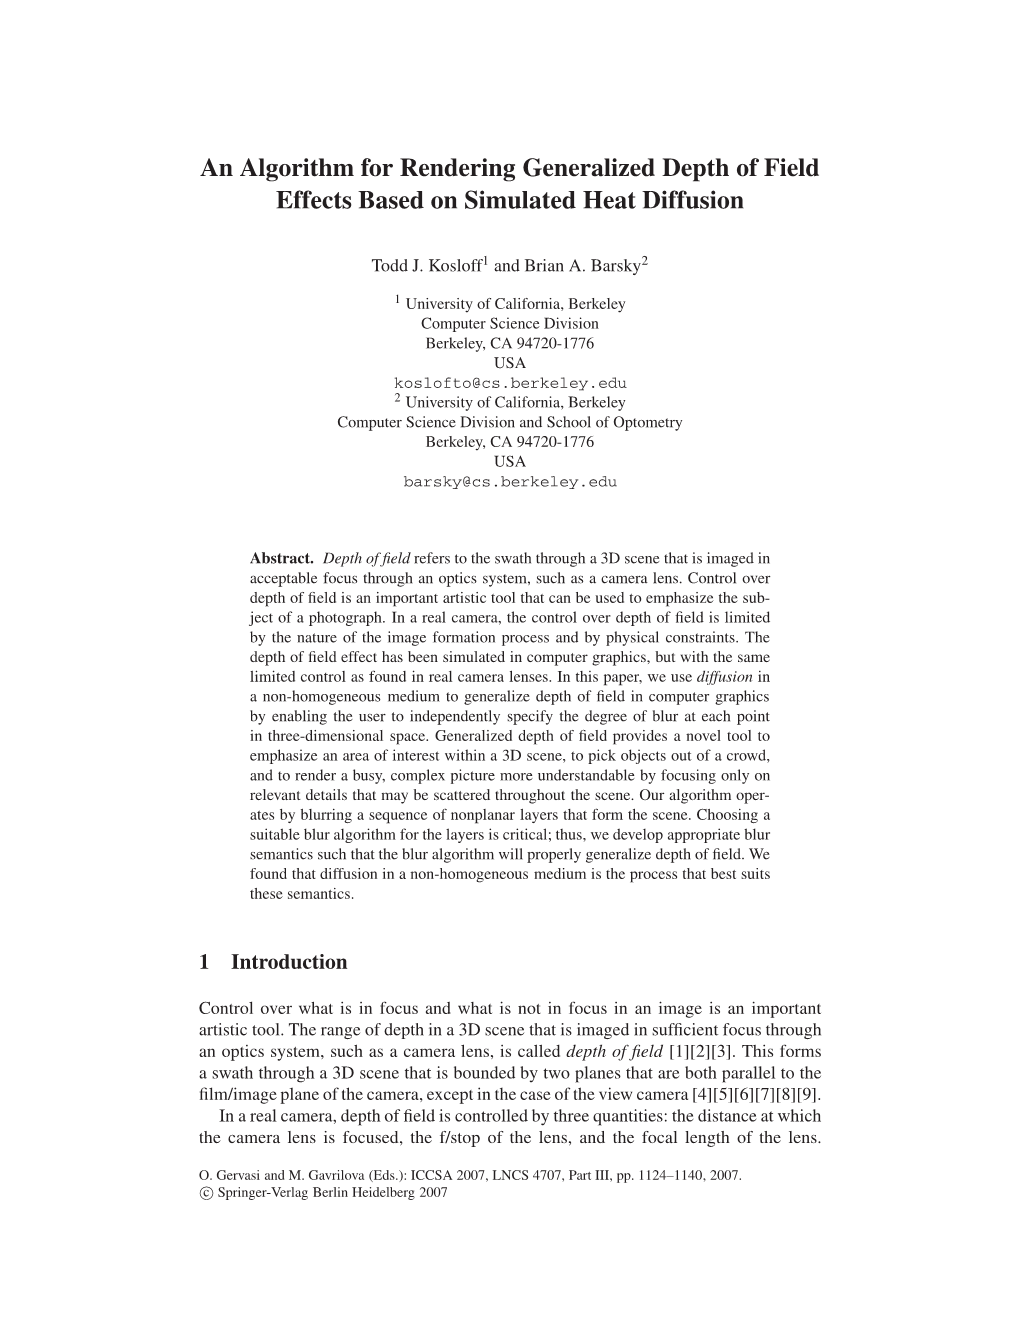 An Algorithm for Rendering Generalized Depth of Field Effects Based on Simulated Heat Diffusion